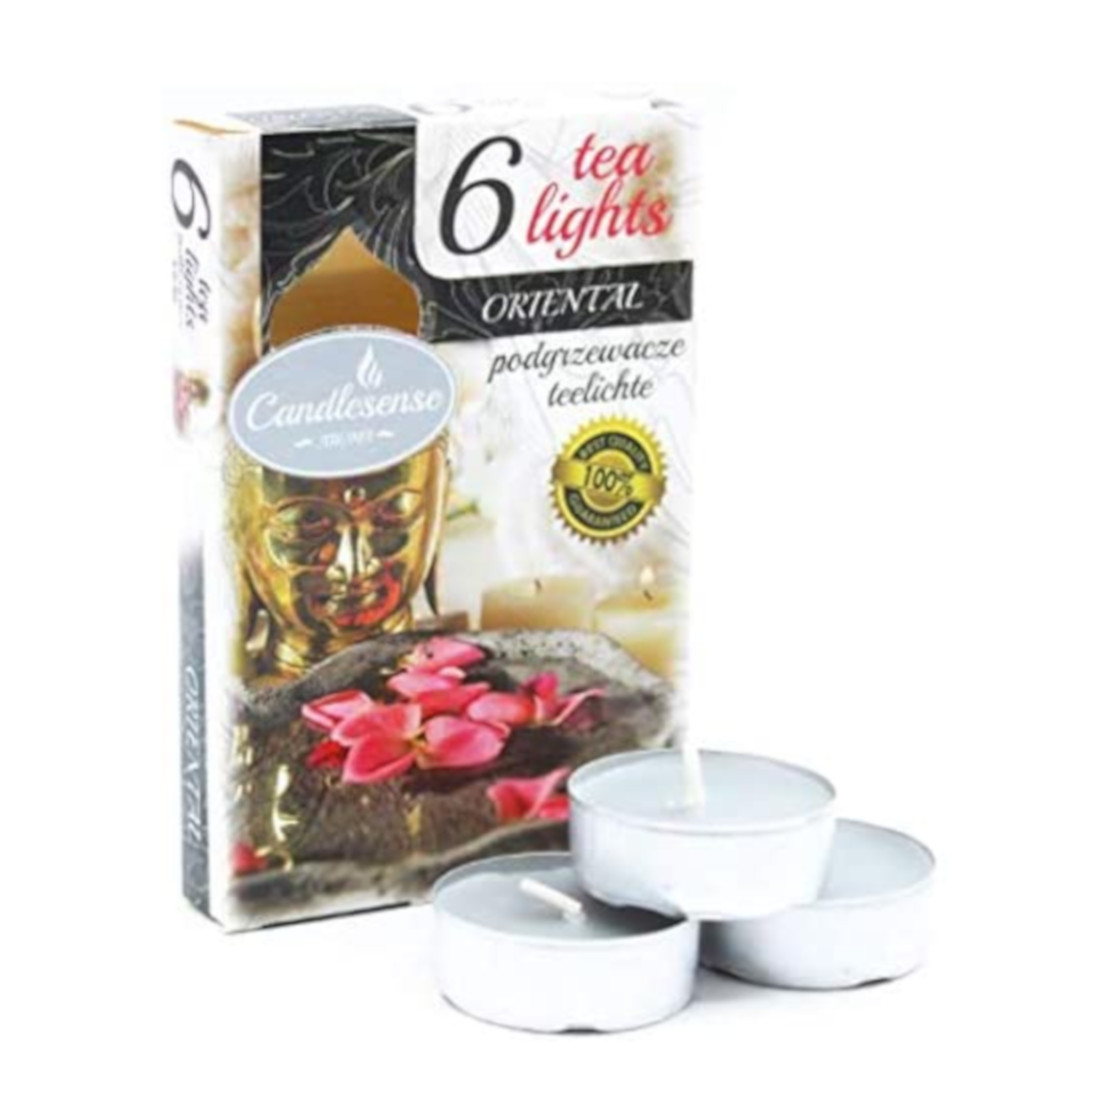 Candlesense Oriental Scented Tealights - Set of 6